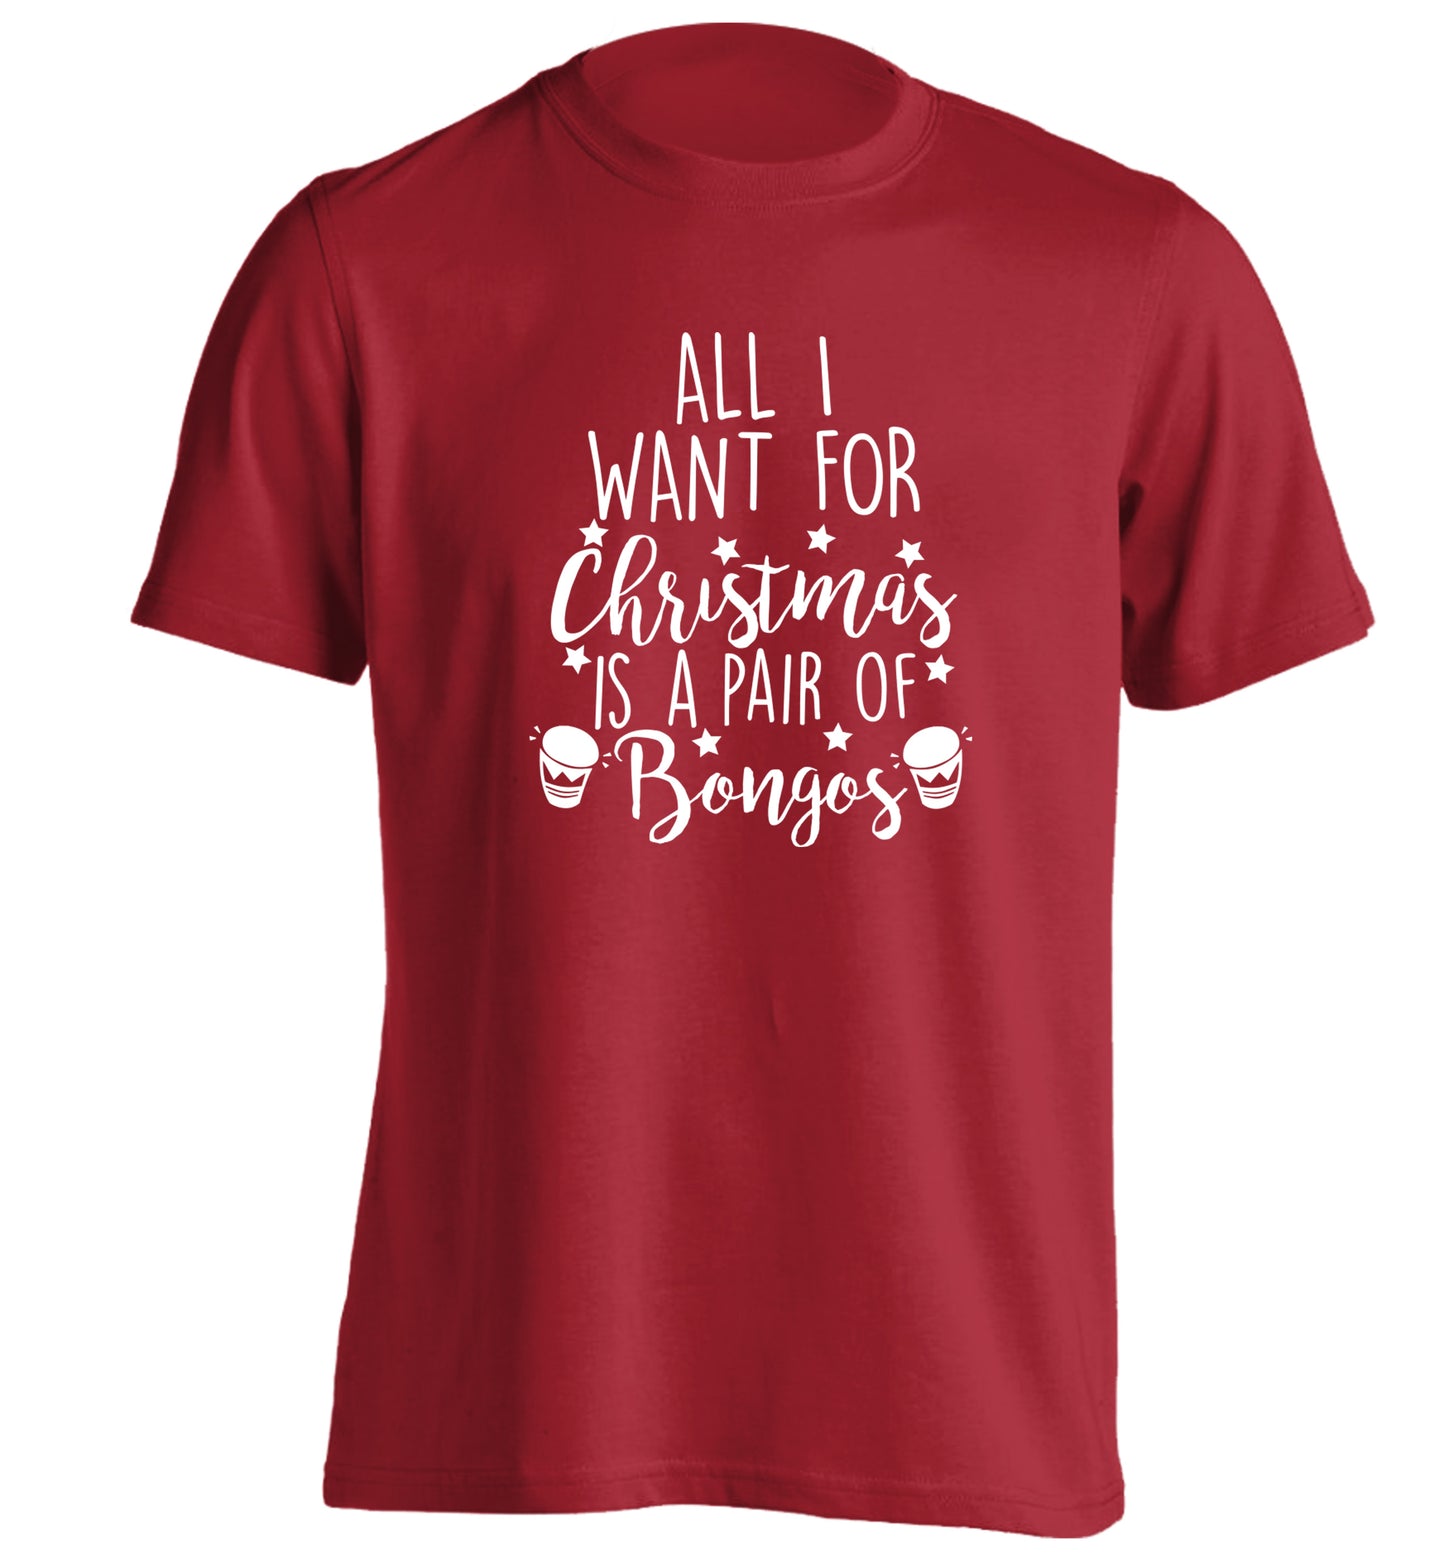 All I want for Christmas is a pair of bongos! adults unisex red Tshirt 2XL